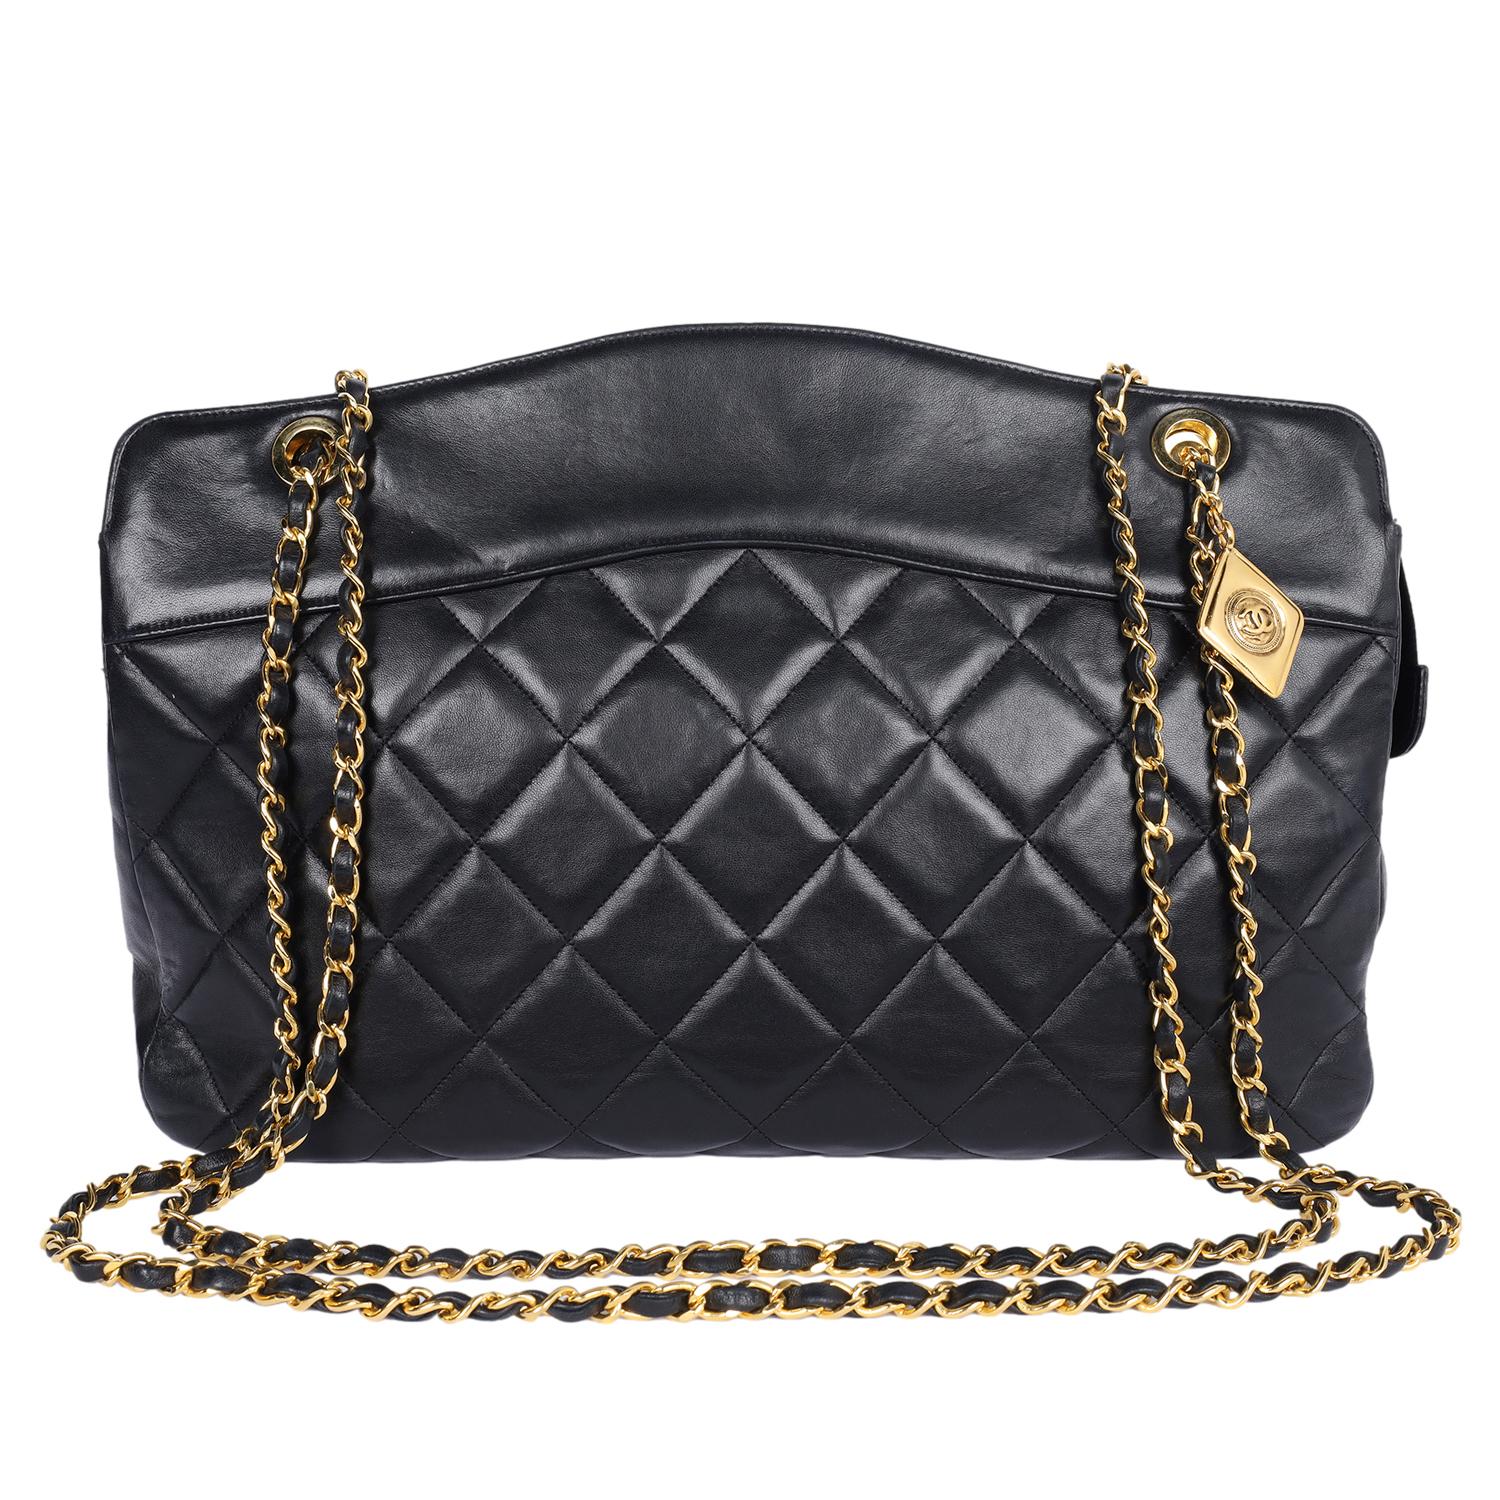 Chanel Black Quilted Lambskin Leather Crossbody Bag 1989 In Good Condition For Sale In Salt Lake Cty, UT